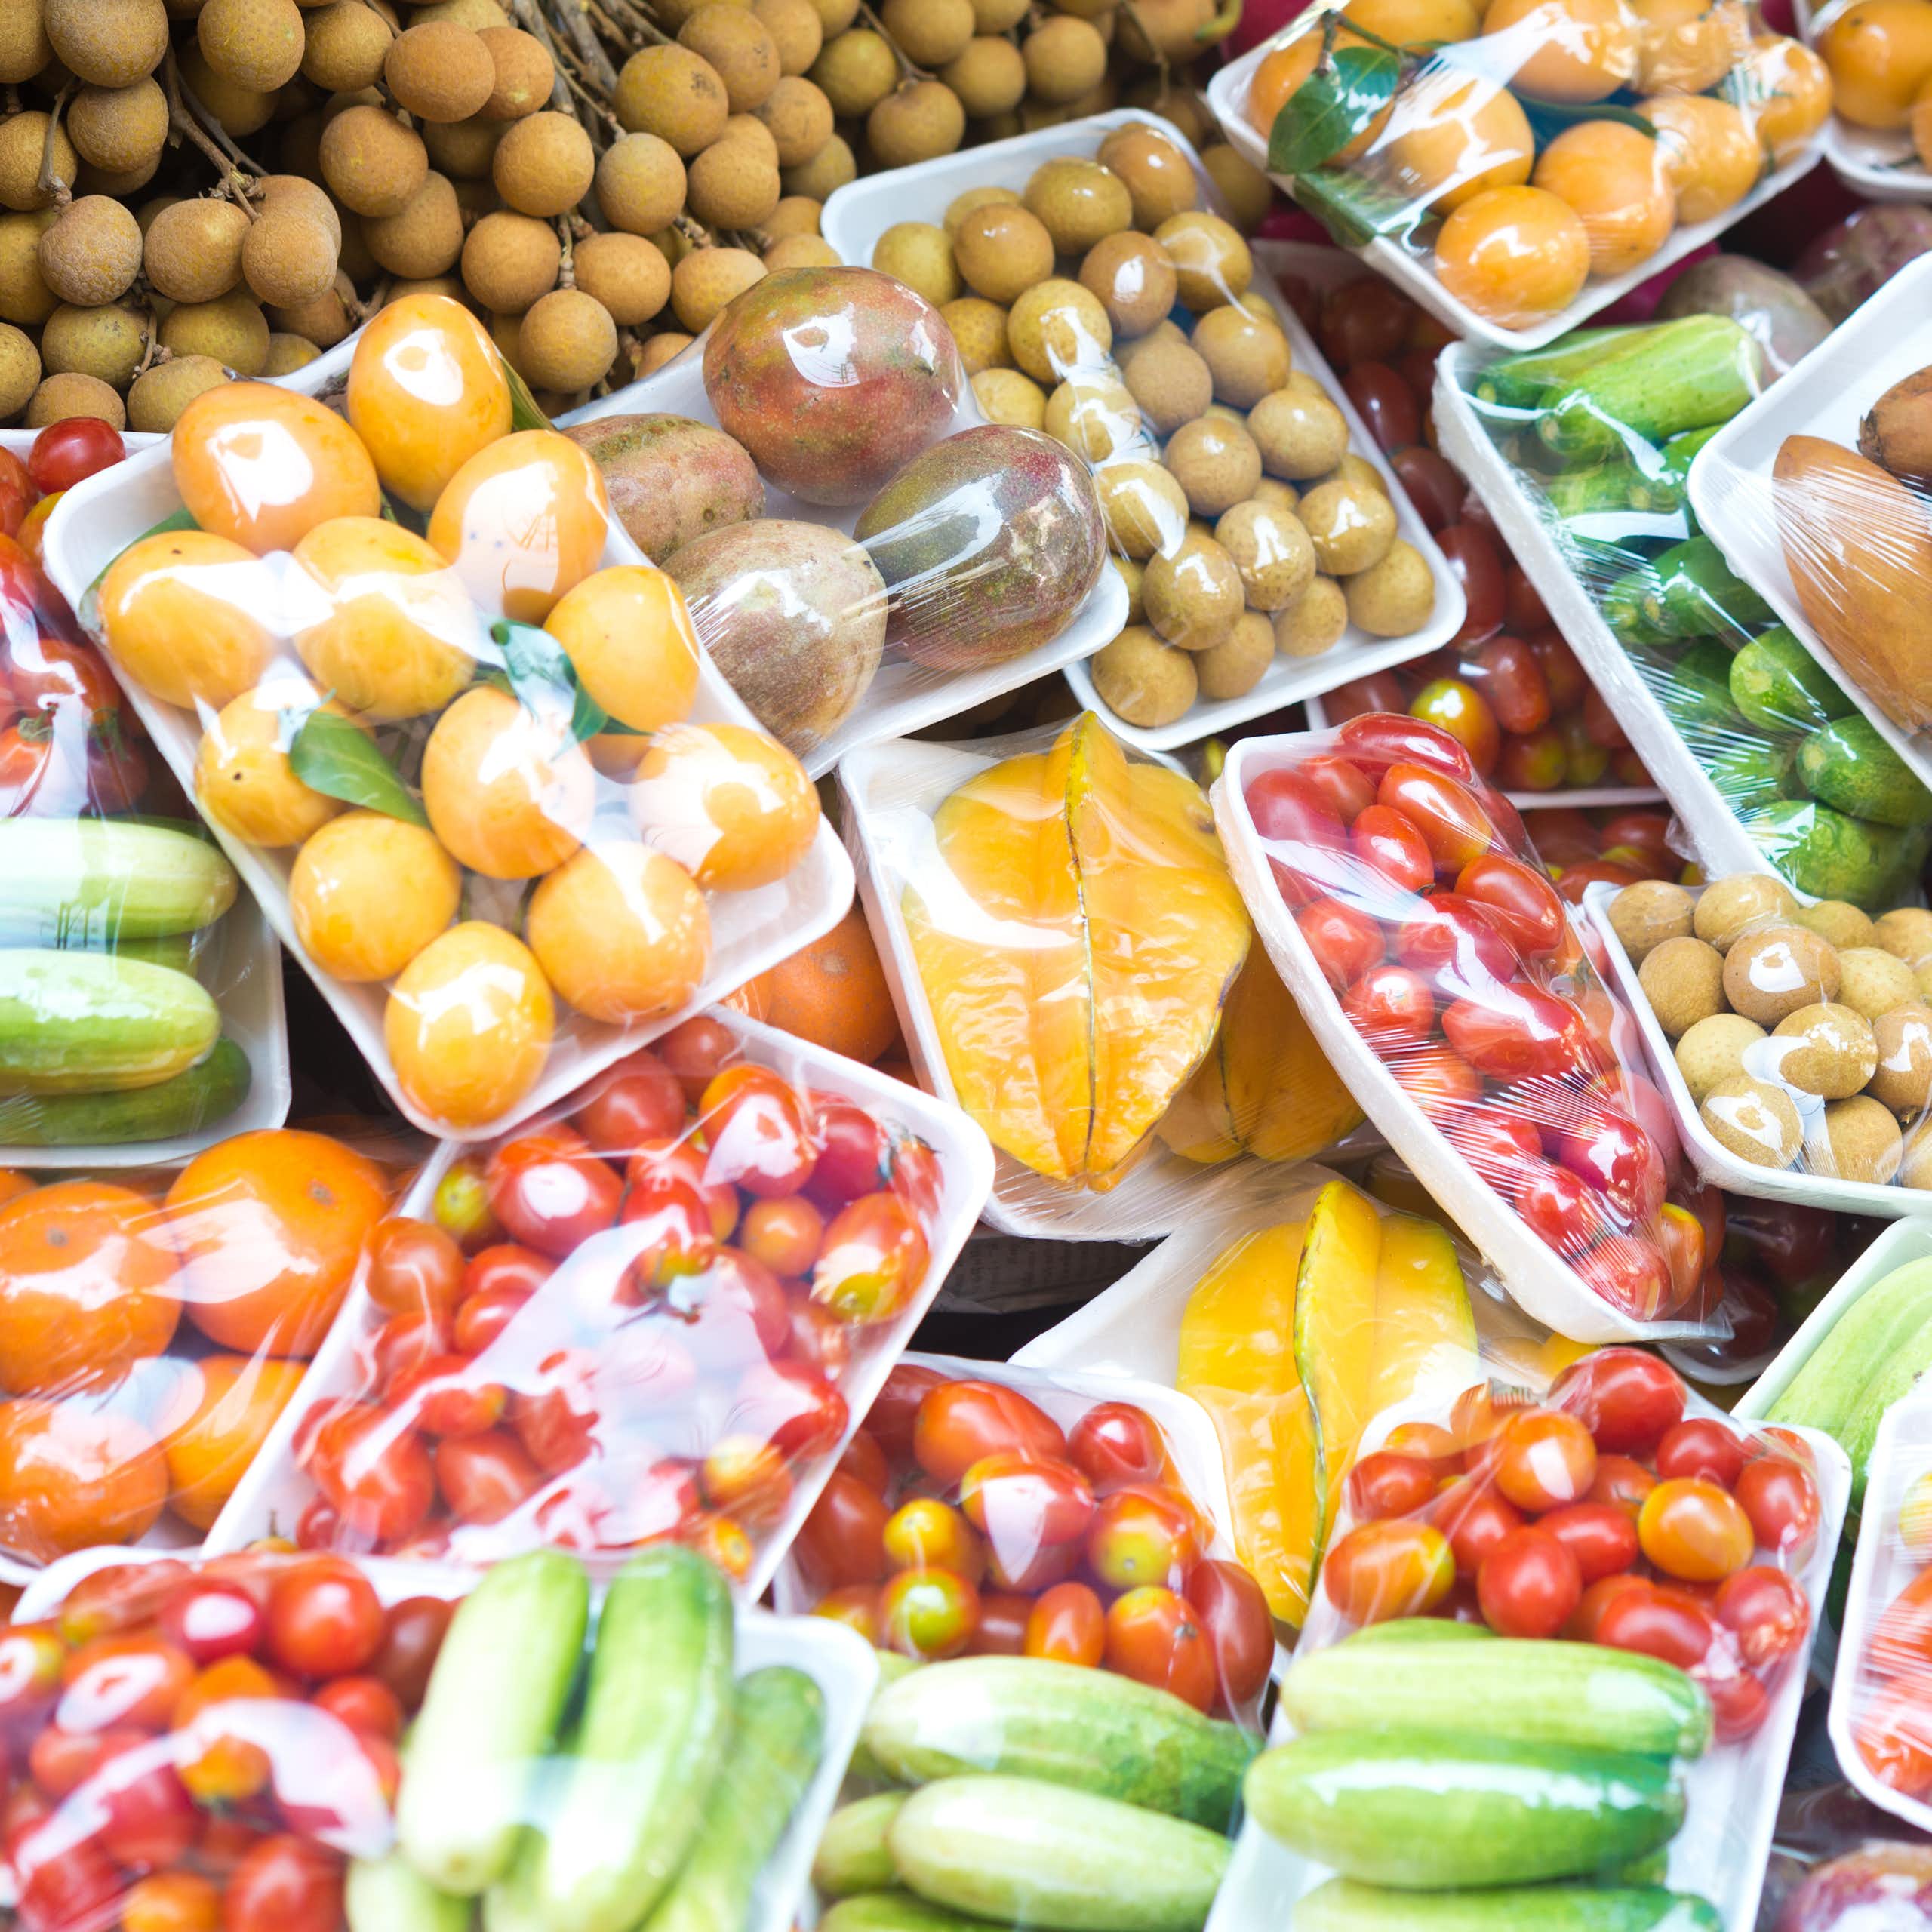 A variety of fruits and vegetables in plastic packing